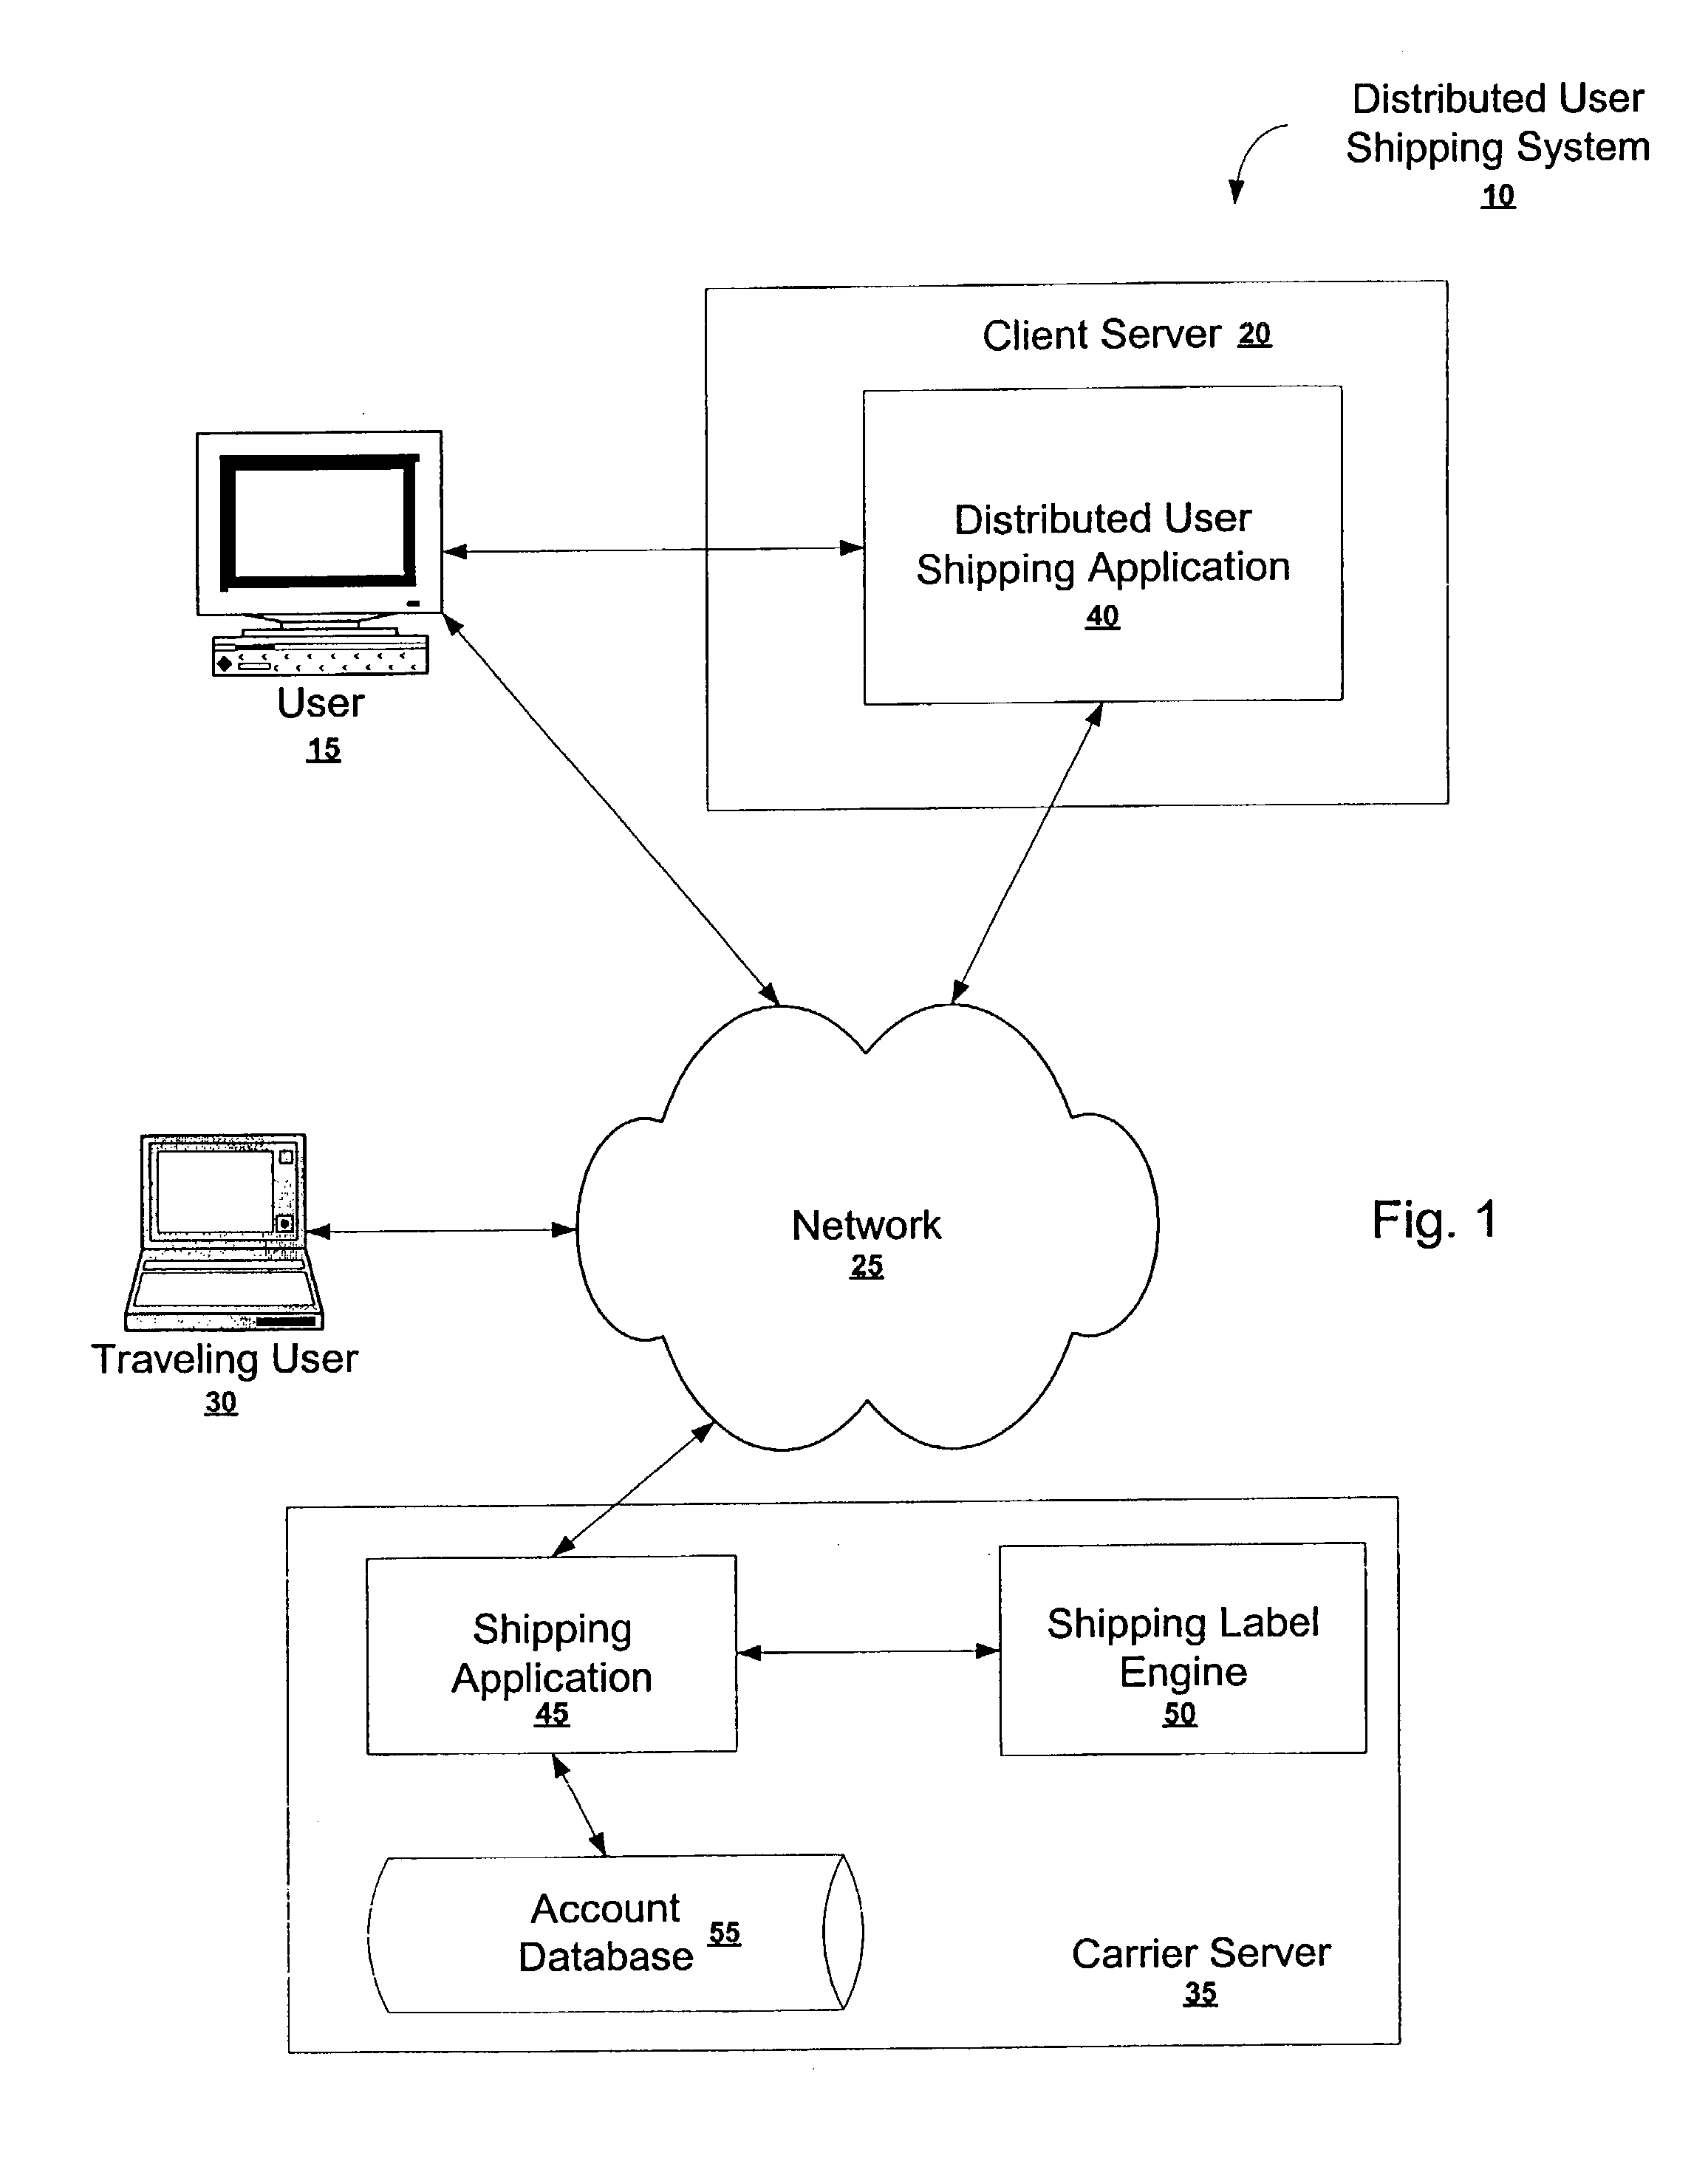 Distributed-user shipping system